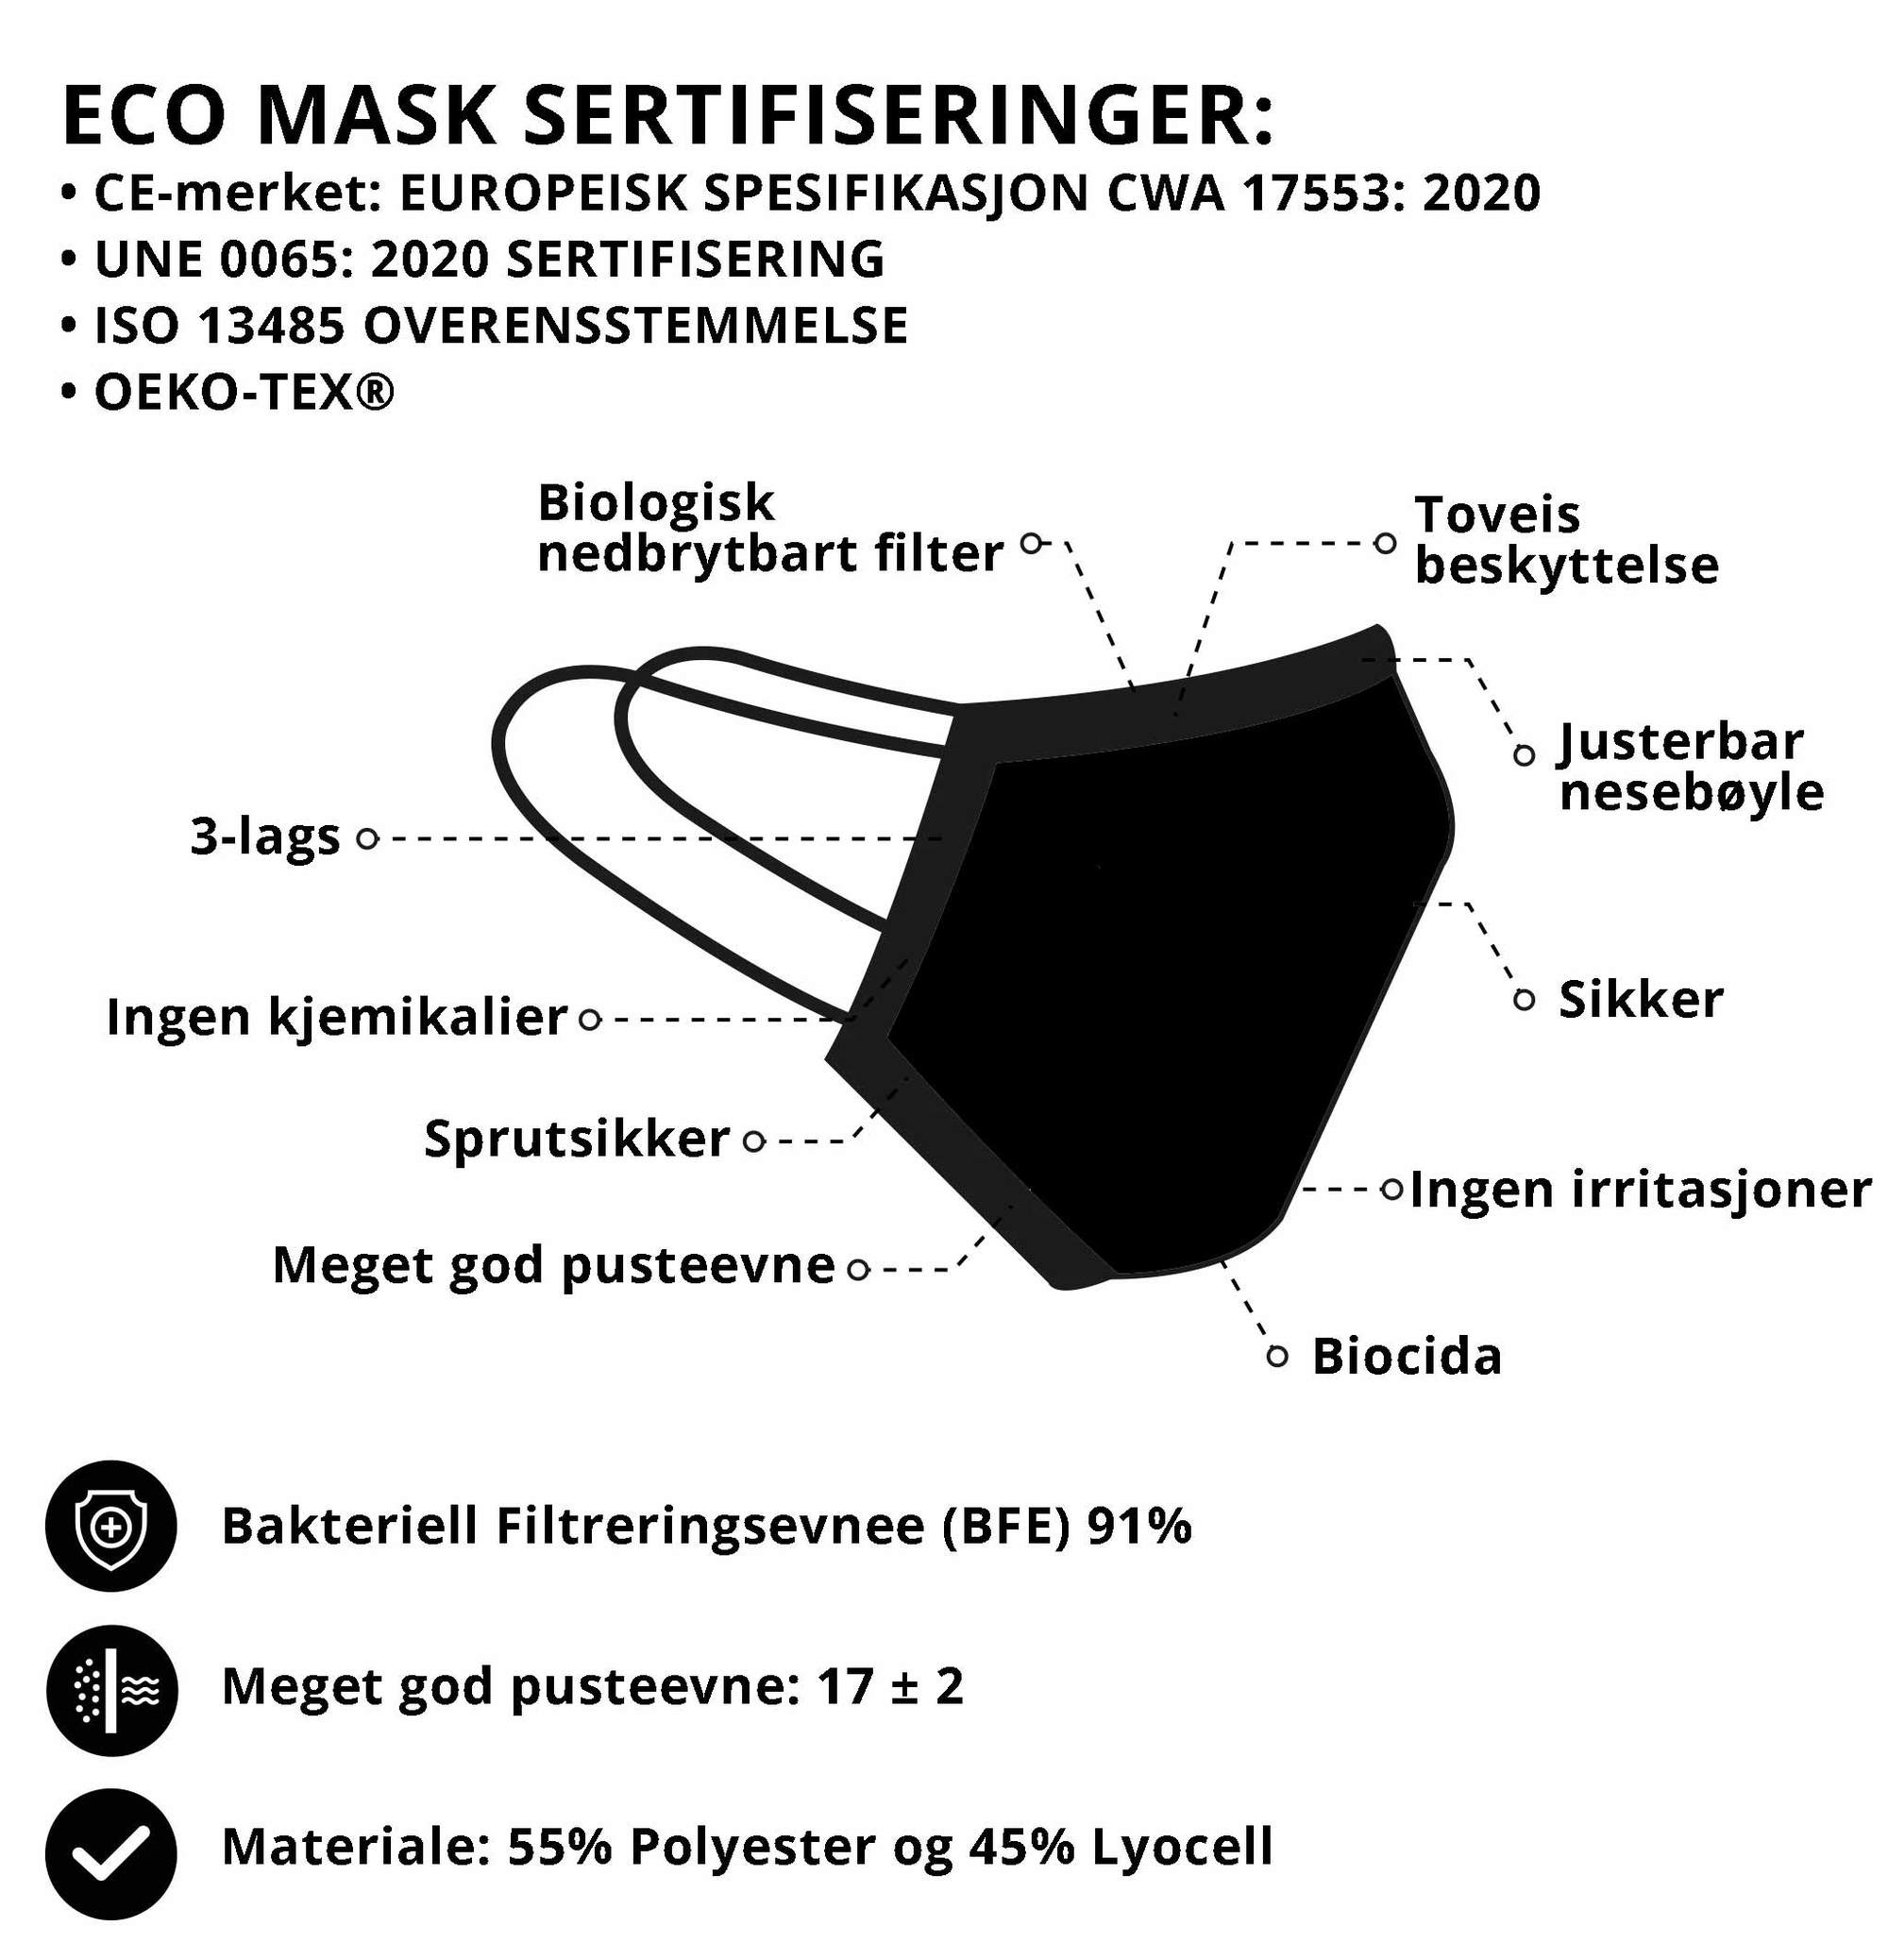 ECO 3-layer washable cloth mask: Black Lives Matter, produced according to European Specification CWA 17553: 2020